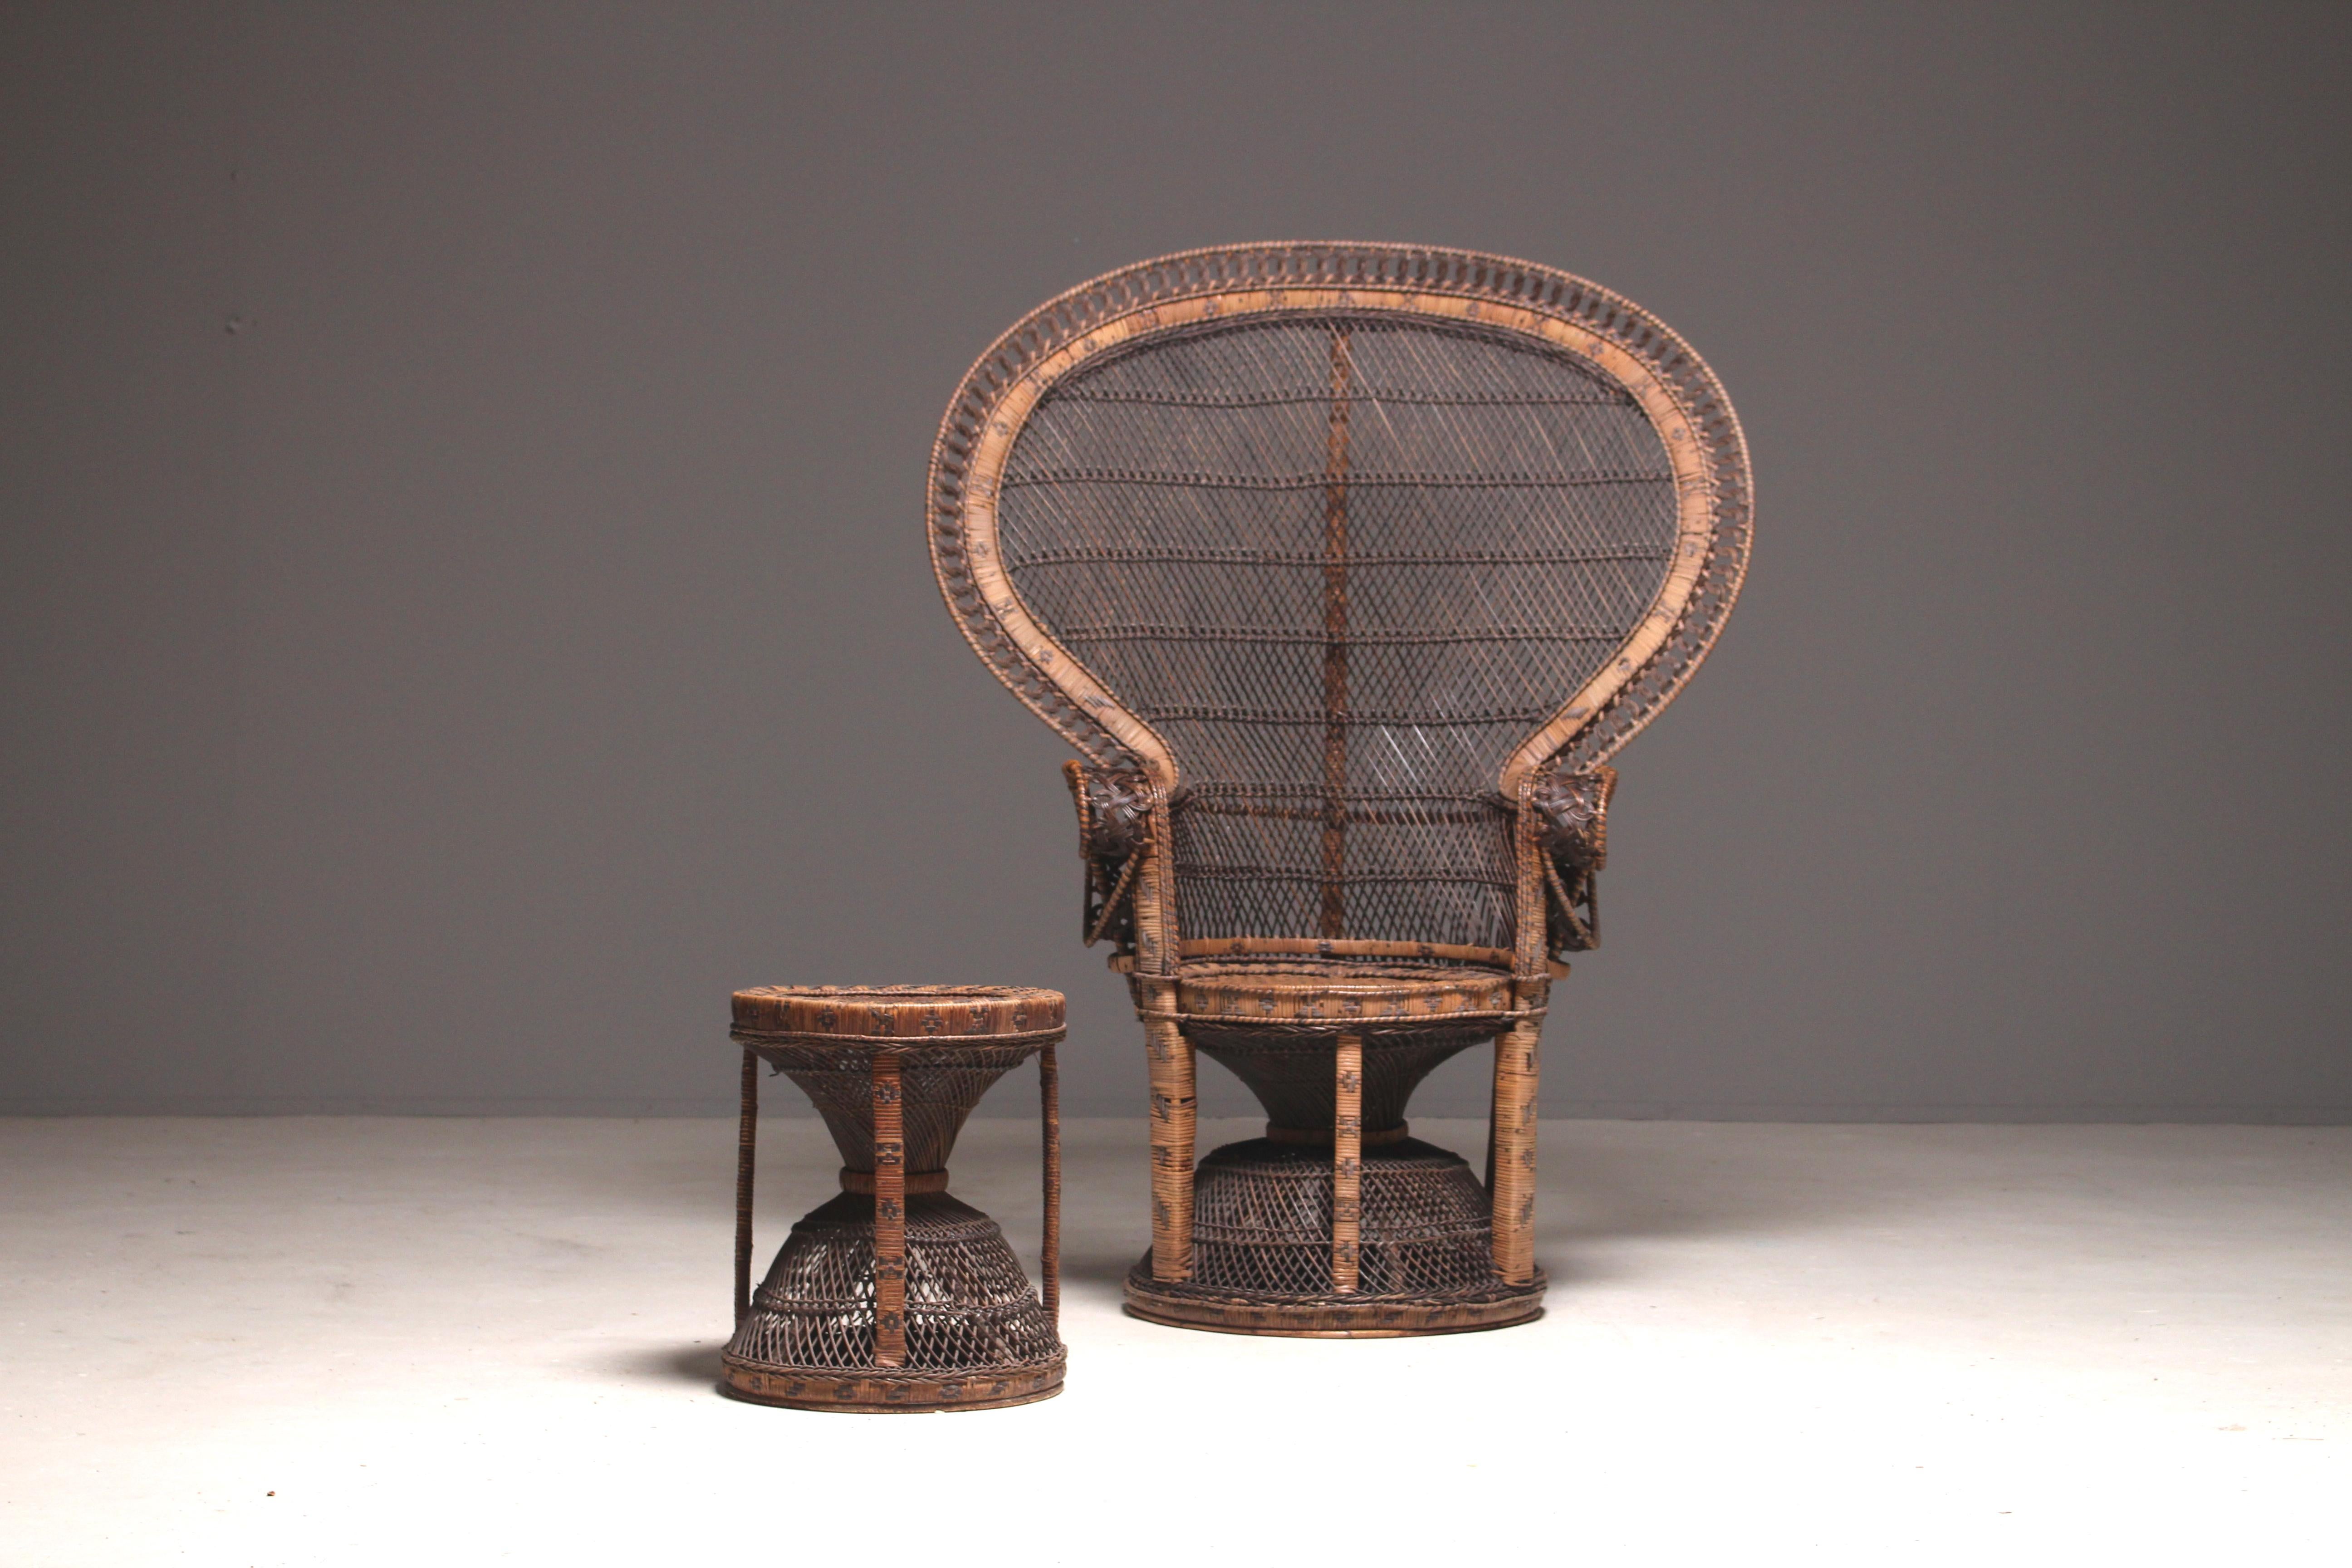 A two-tone Indonesian peacock chair and stool made out of bamboo and rattan. Excellent craftsmanship was needed to built these beautiful pieces of art.
The stool is extremely rare and is perfectly matching with the chair.
This chair became iconic